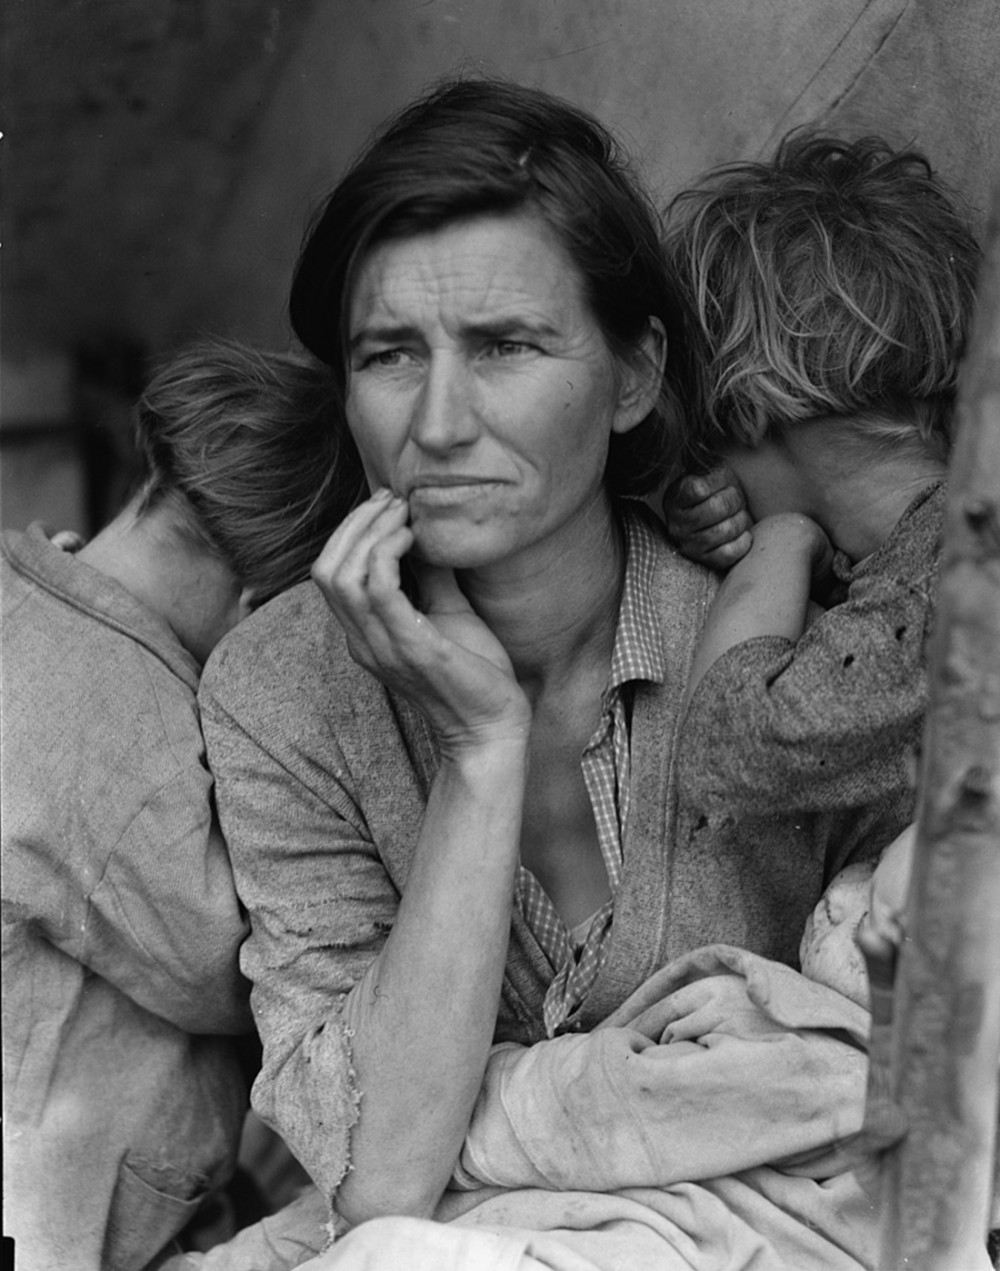 This iconic photograph made real the suffering of millions during the Great Depression. Dorothea Lange, “Destitute pea pickers in California. Mother of seven children. Age thirty-two. Nipomo, California” or “Migrant Mother,” February/March 1936. Library of Congress, http://www.loc.gov/pictures/item/fsa1998021539/PP/.